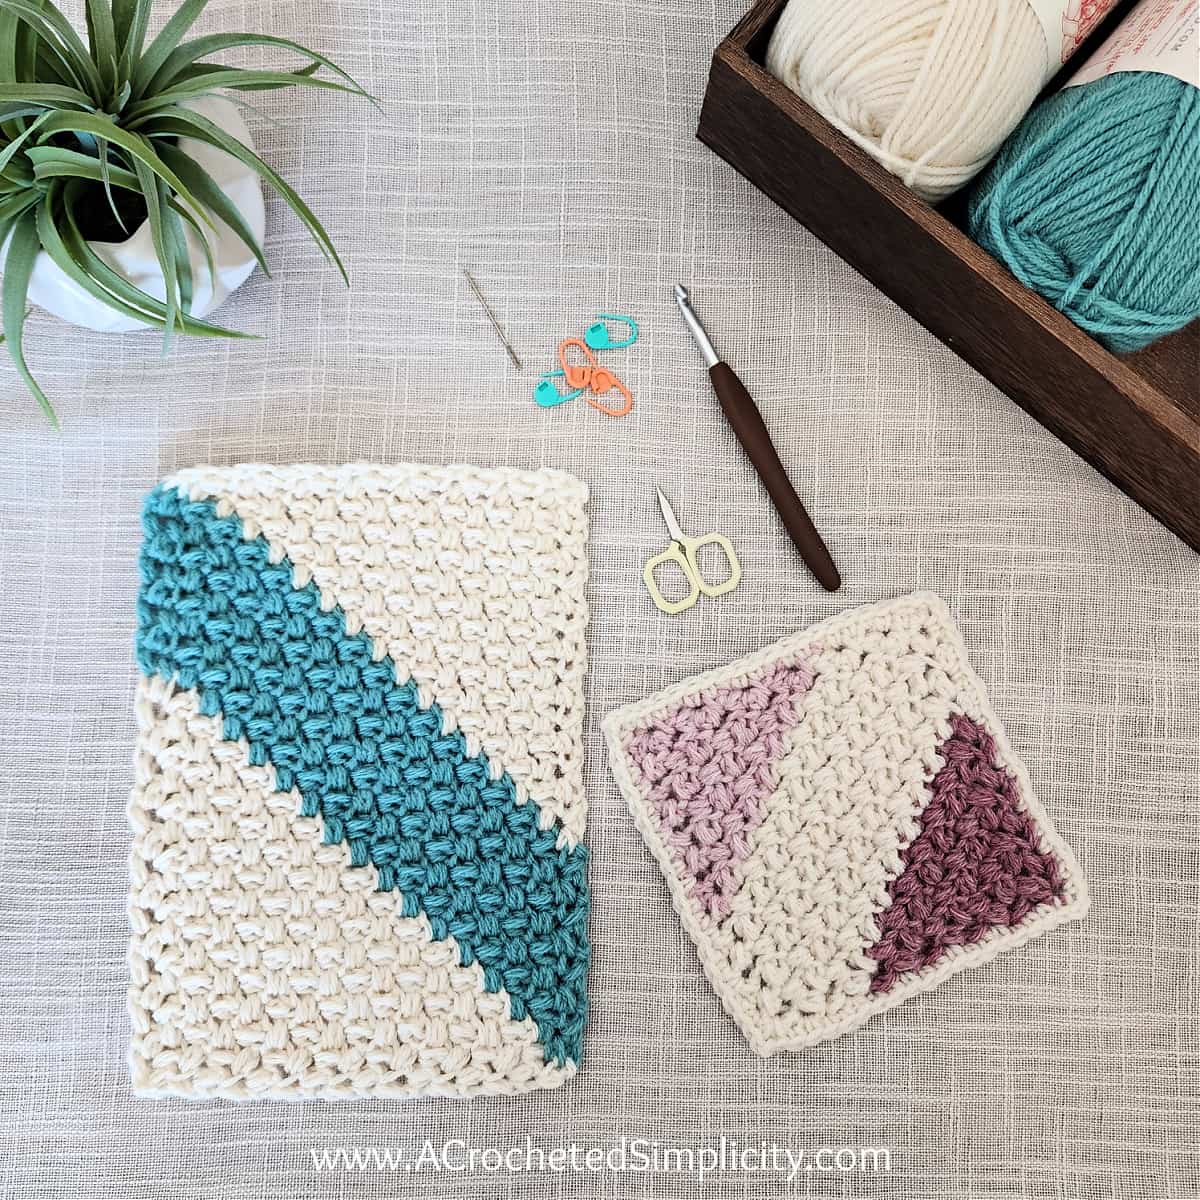 Image is of a c2c rectangle and square crocheted using the mini bean stitch and working color changes.